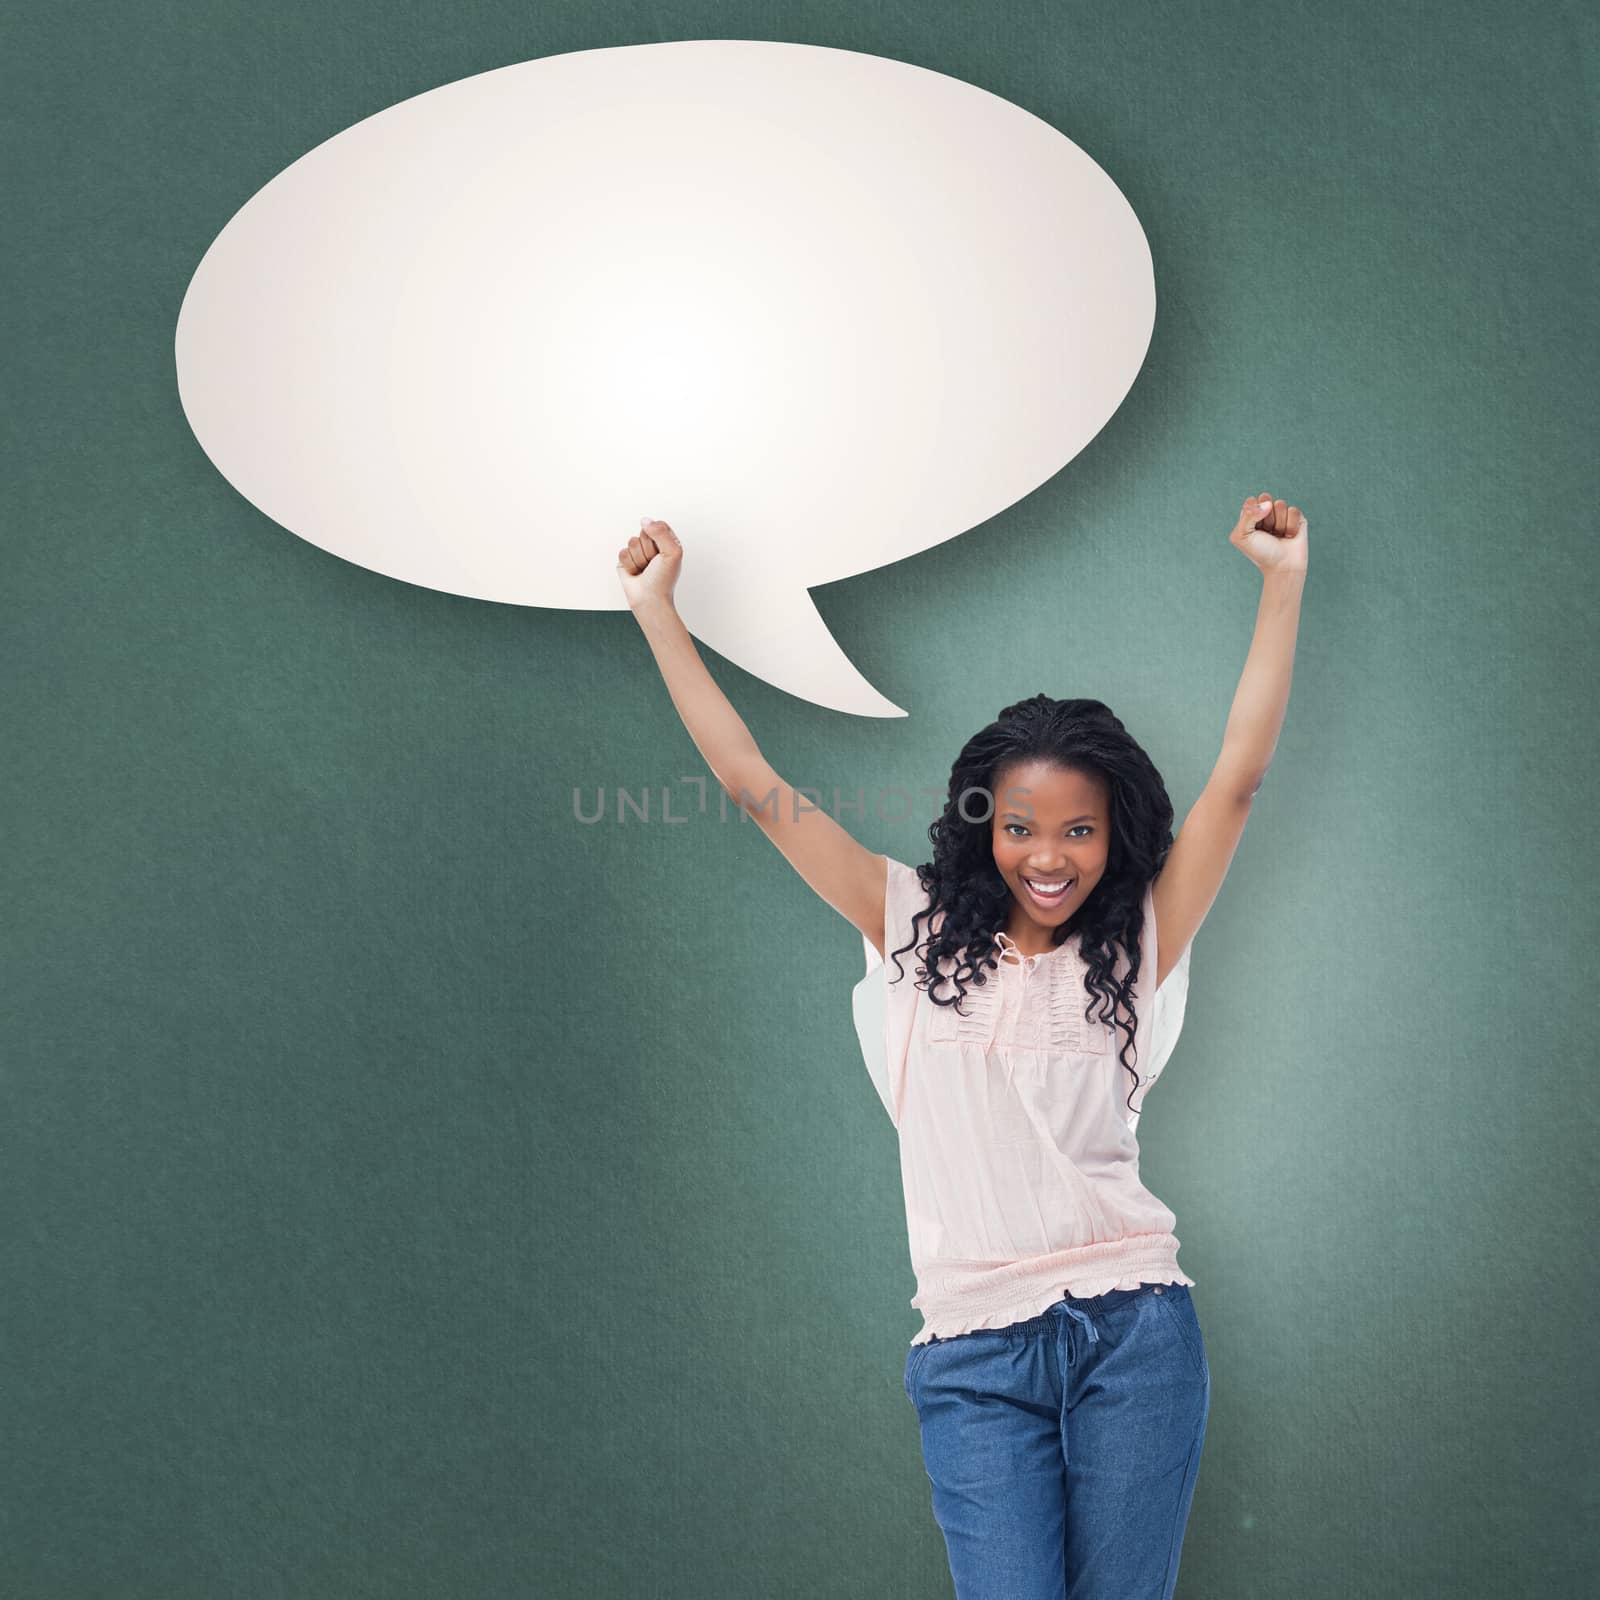 A young happy woman stands with her hands in the air against speech bubble